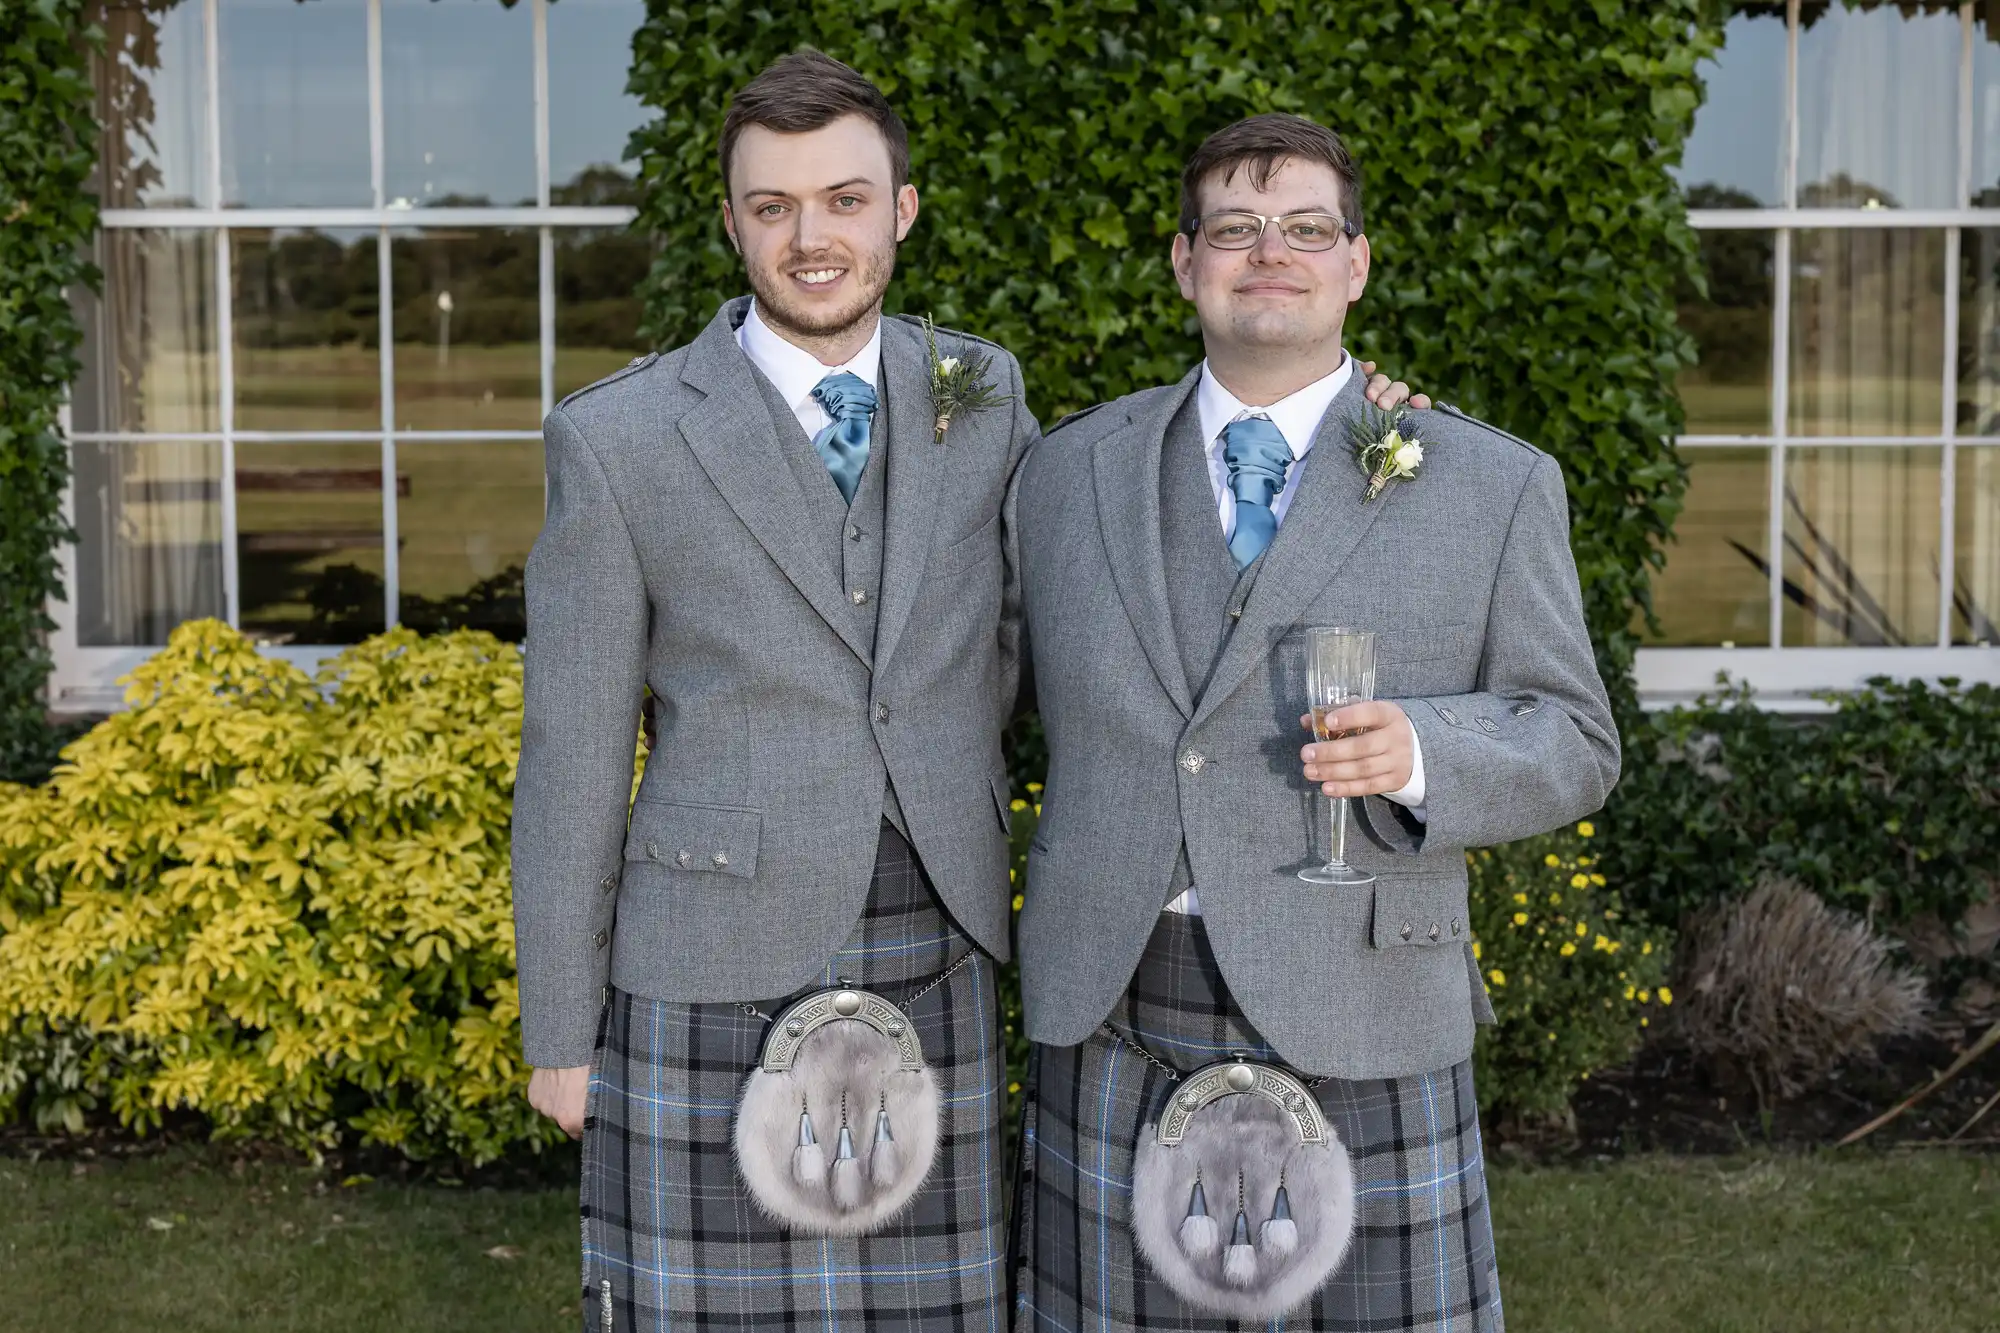 Two men in traditional scottish attire, including kilts and tweed jackets, smiling and holding champagne glasses, standing outdoors at a formal event.